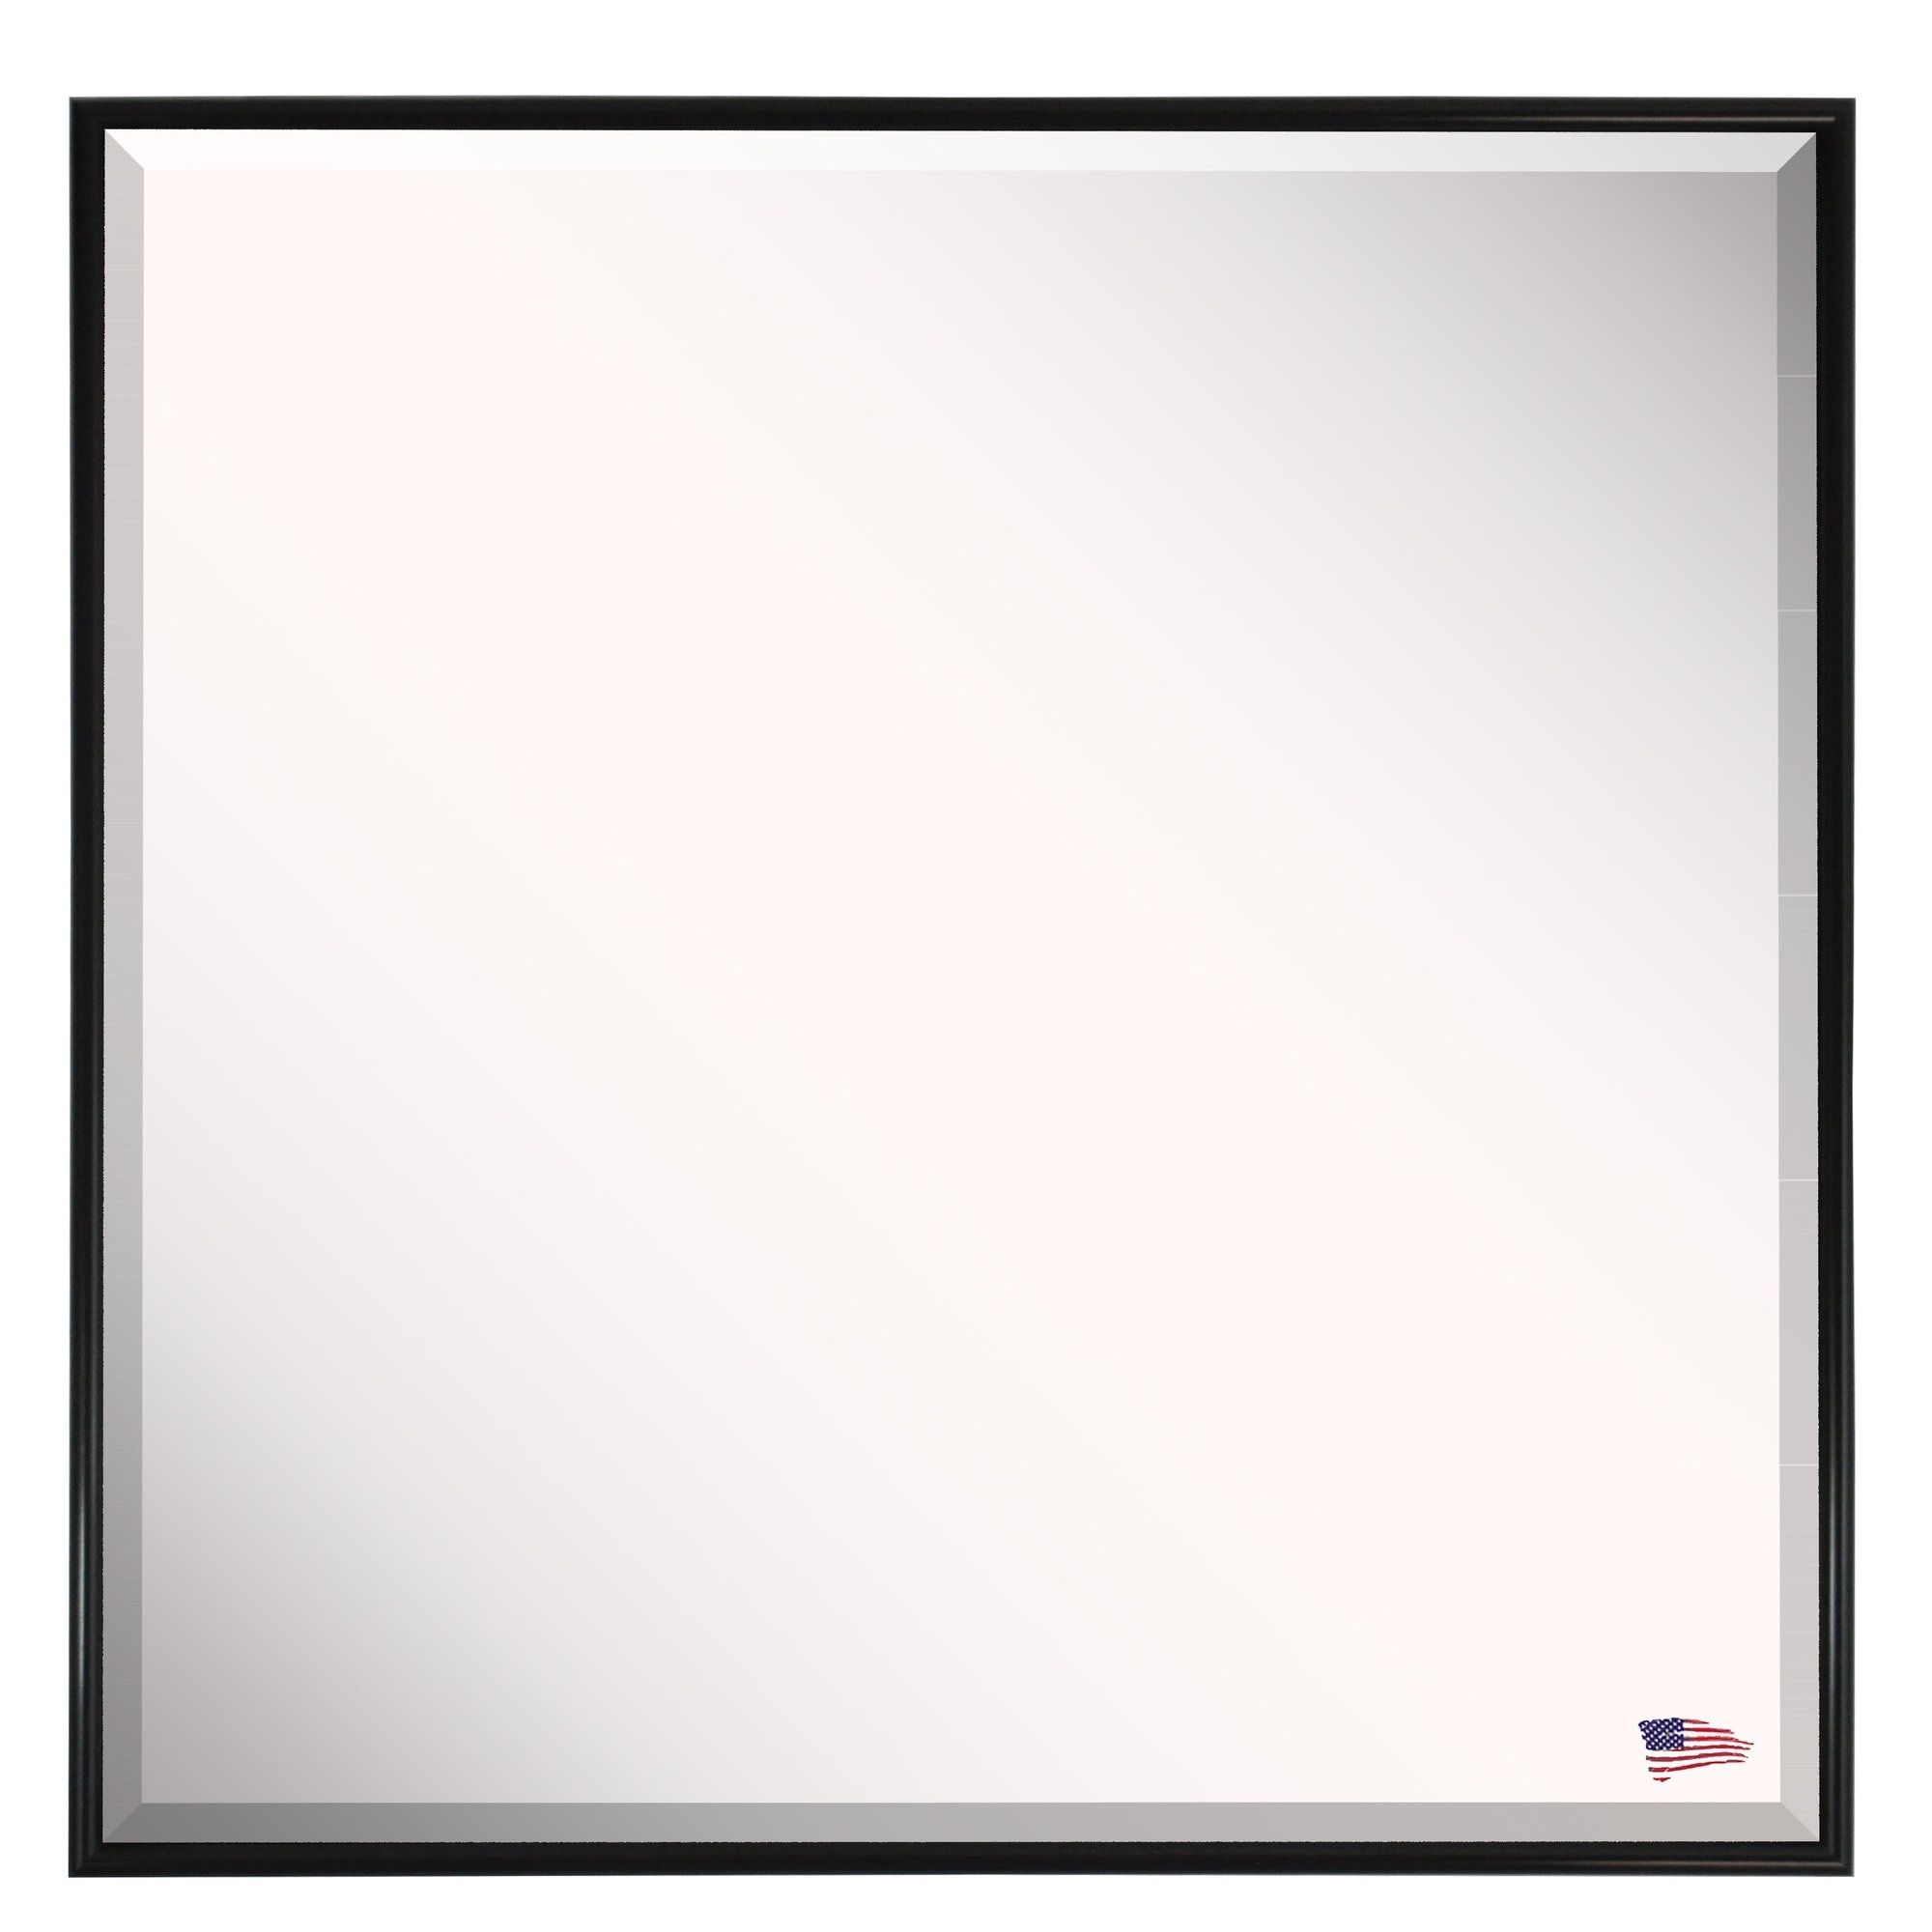 Dar Home Co Square Black Metal Square Wall Mirror Wayfair For Square Wall Mirror (View 4 of 15)